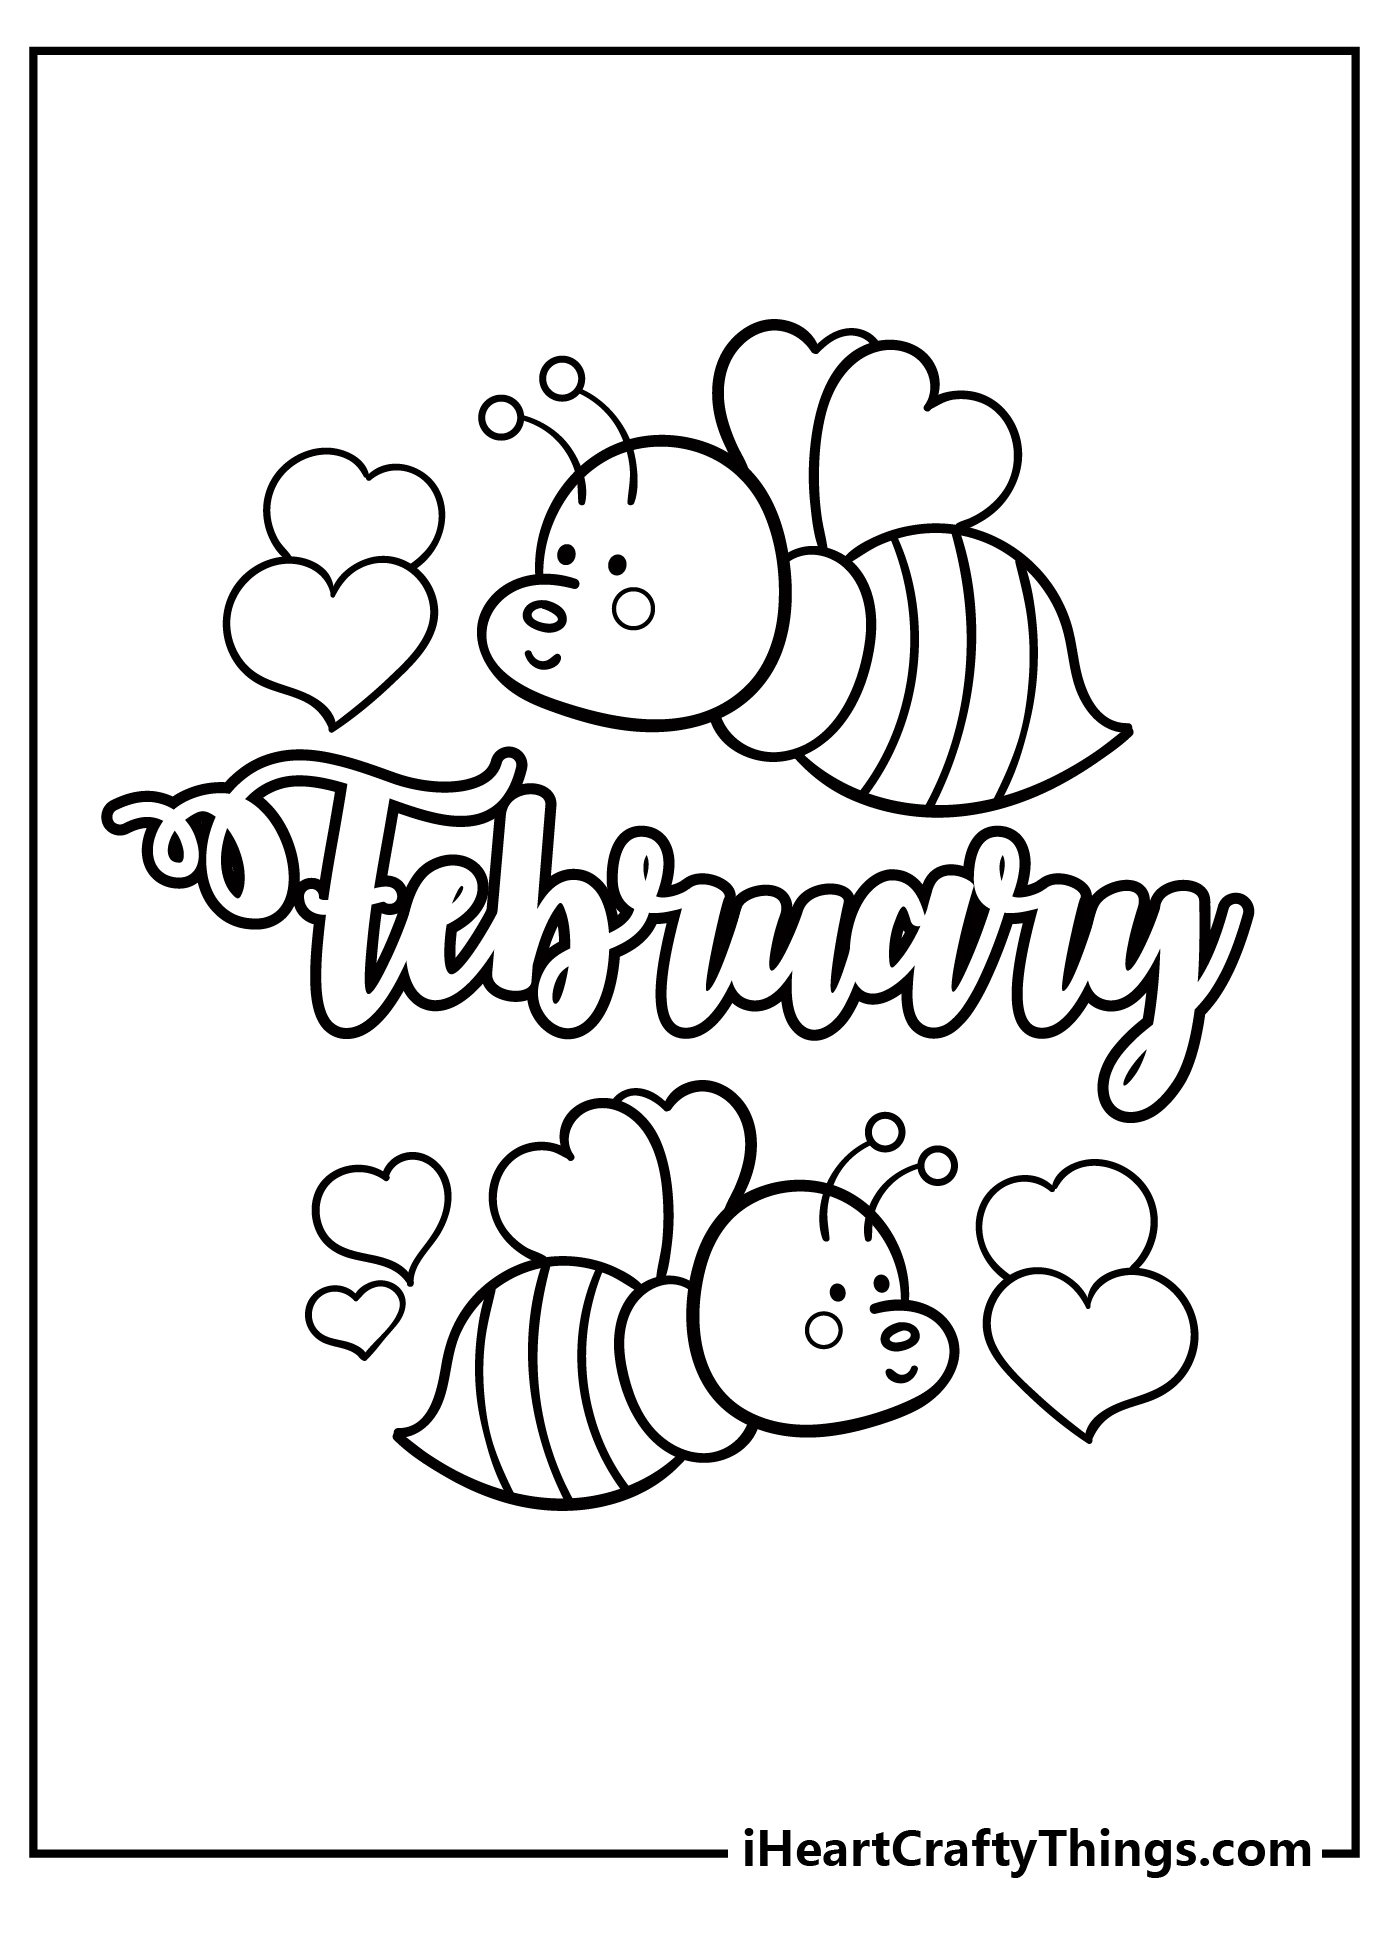 February Coloring Pages for kids free download